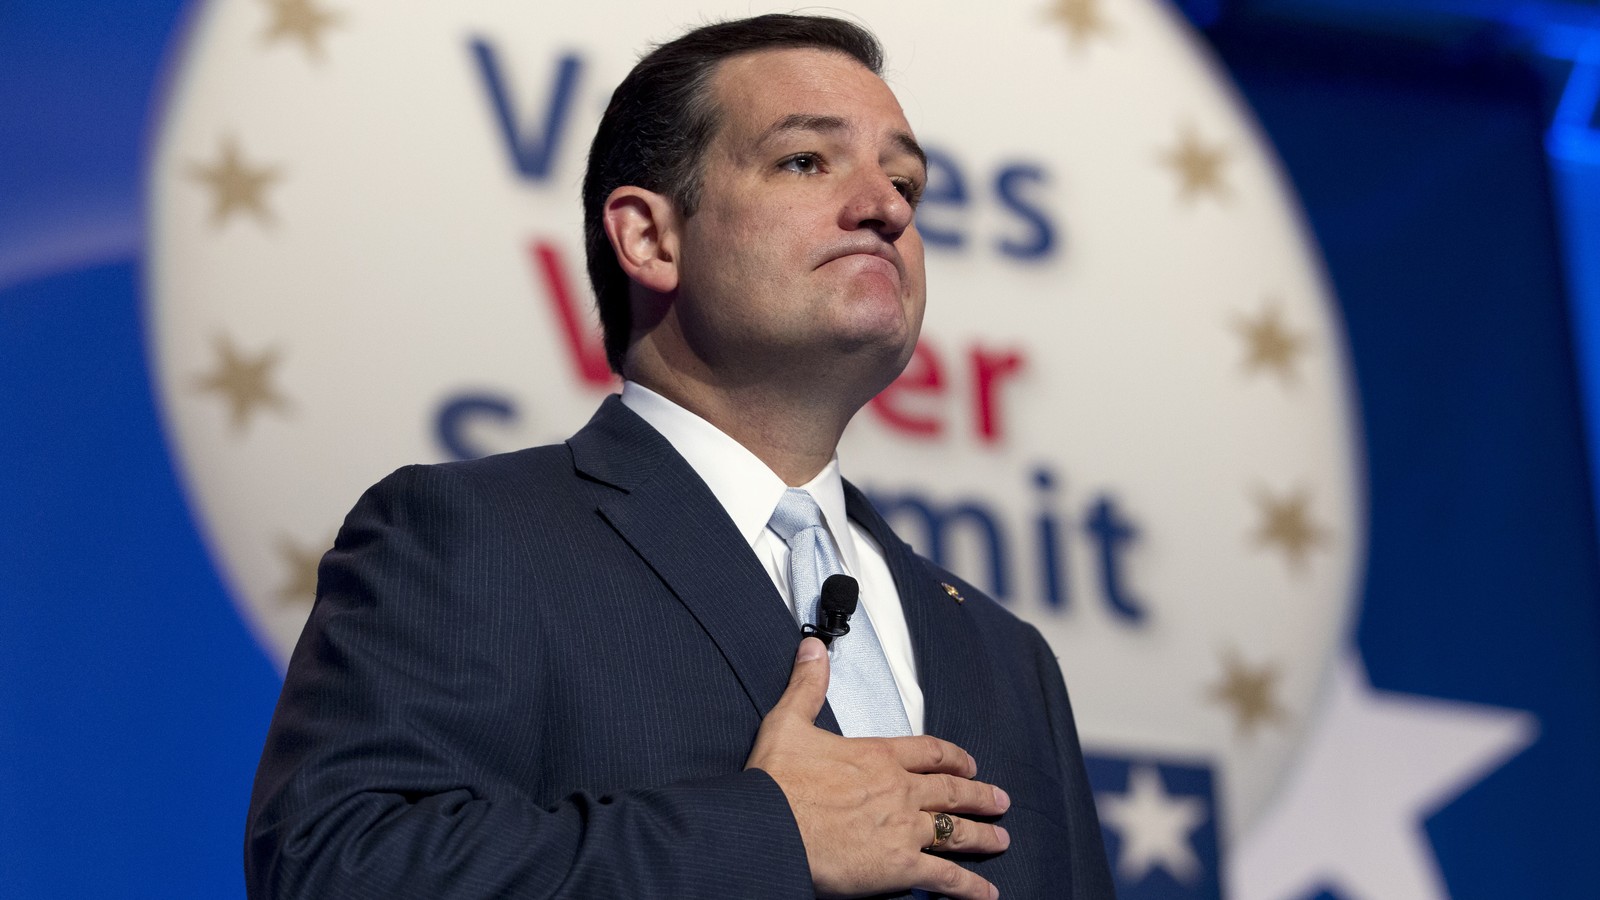 Inside the Conservative Bubble, It Is Looks Big Like Winning Cruz Ted Atlantic - The